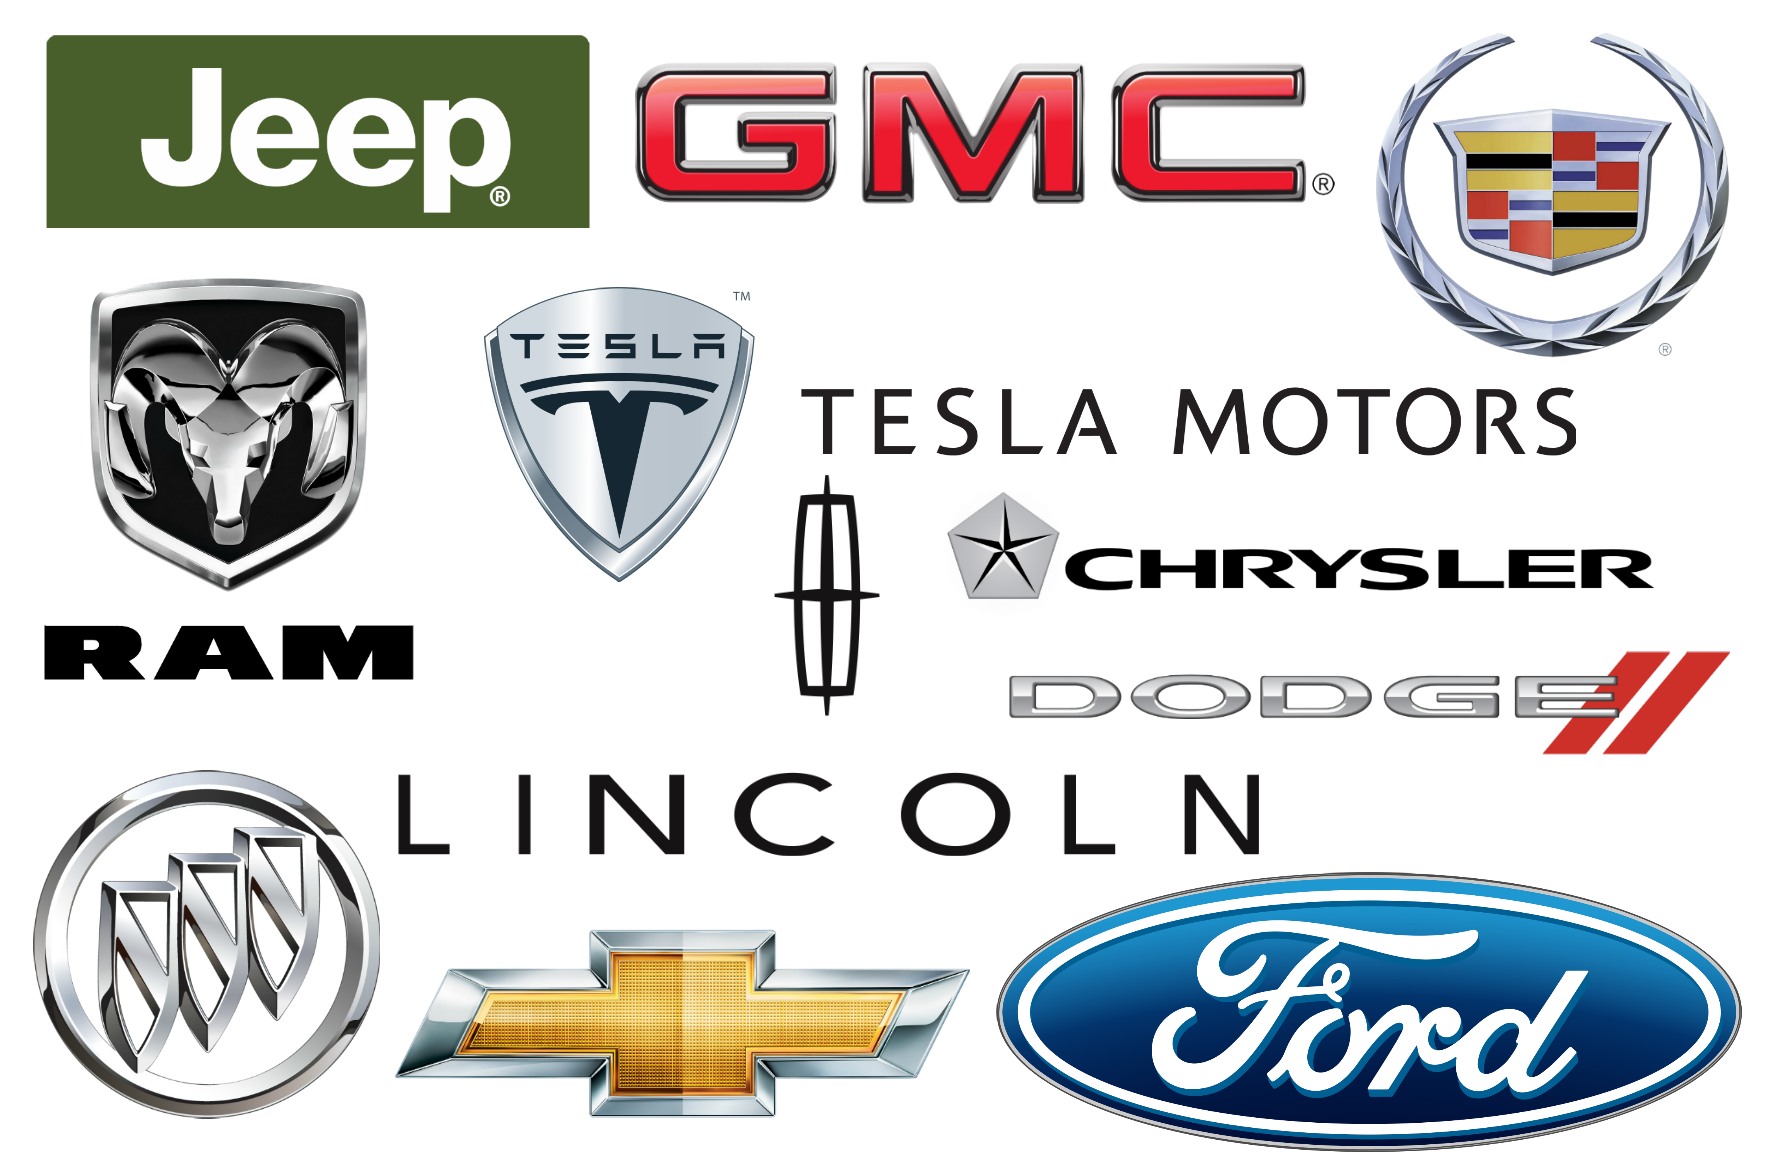 Car Brands Logos  - This Is An Incomplete List Of Every Brand (Also Known As Make Or Marque) Of Car Ever Produced.